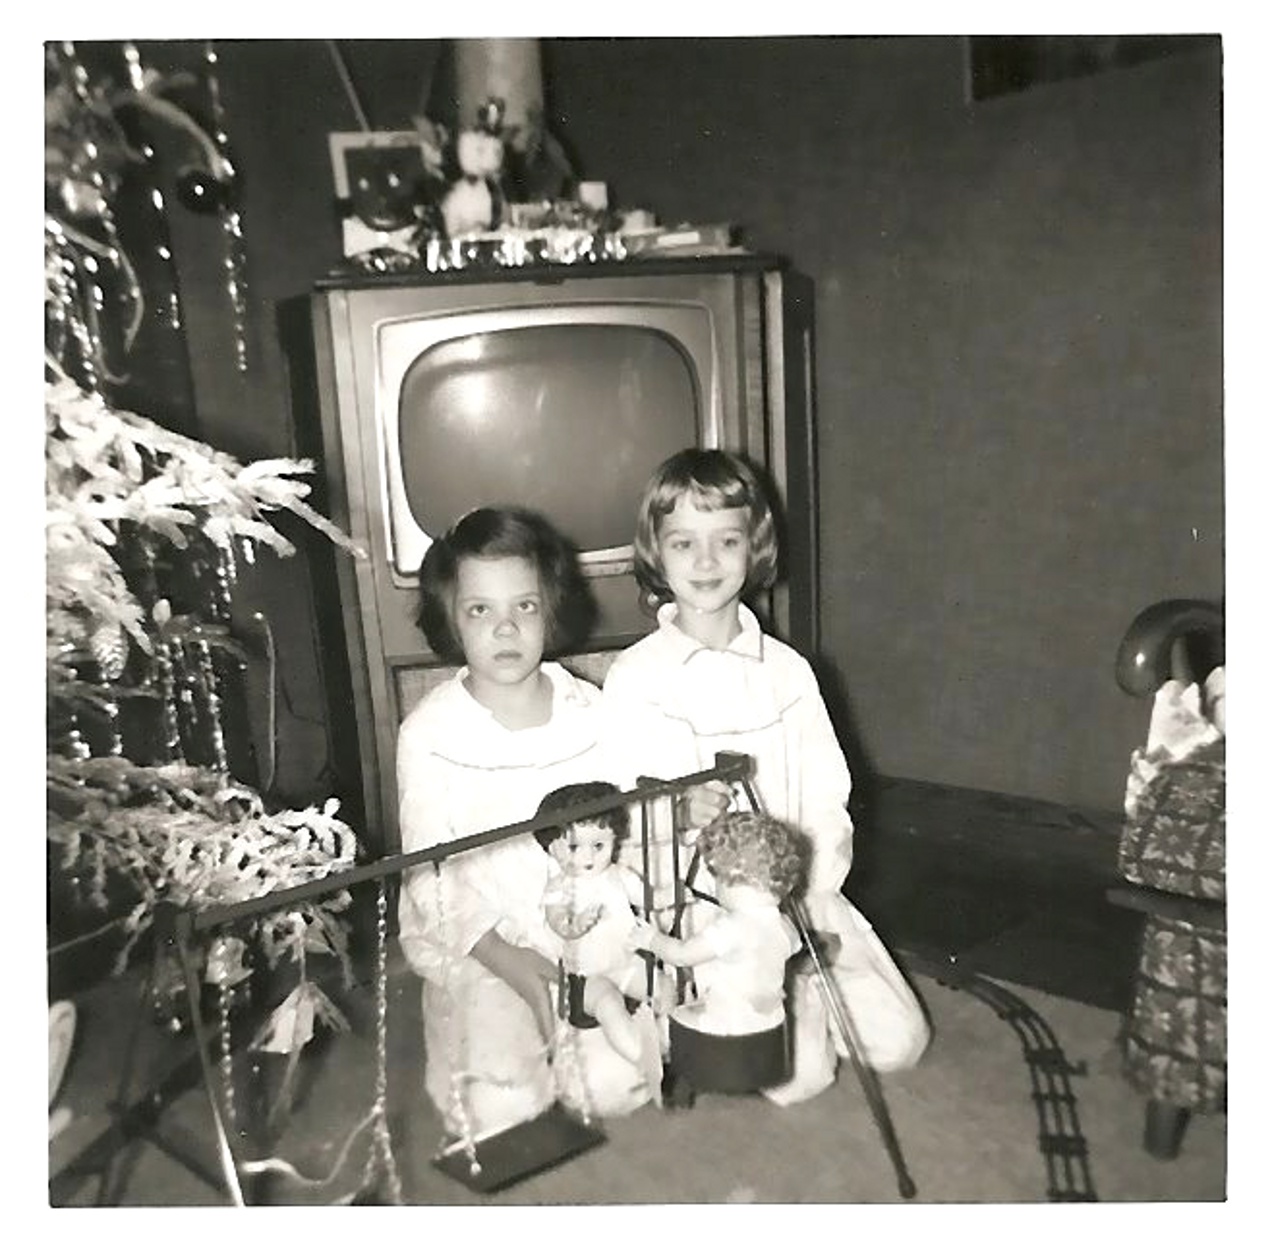 32 pictures of Christmas in the 60s